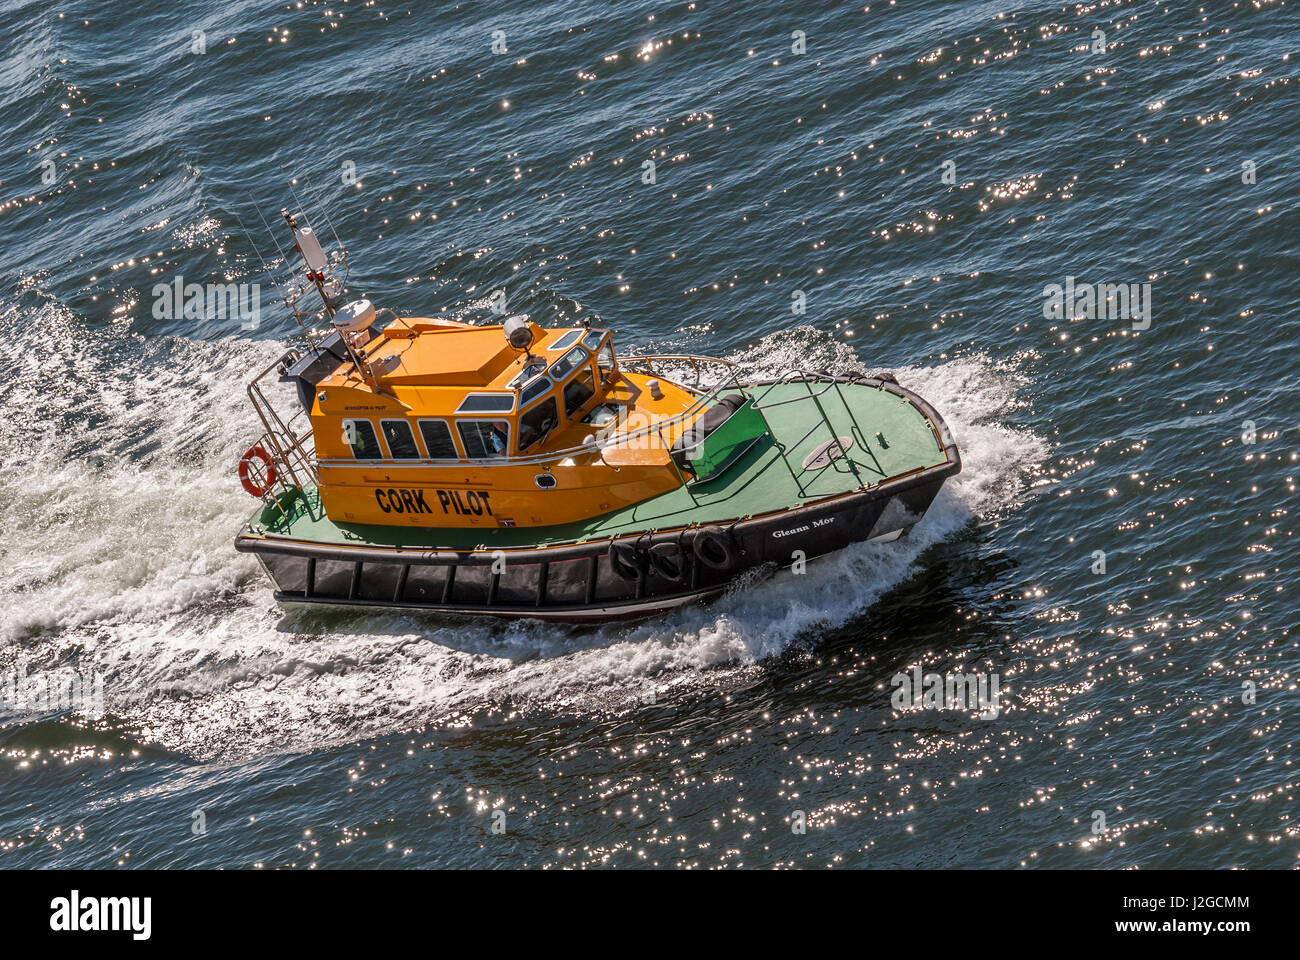 Cork harbour pilot boat in action Stock Photo - Alamy